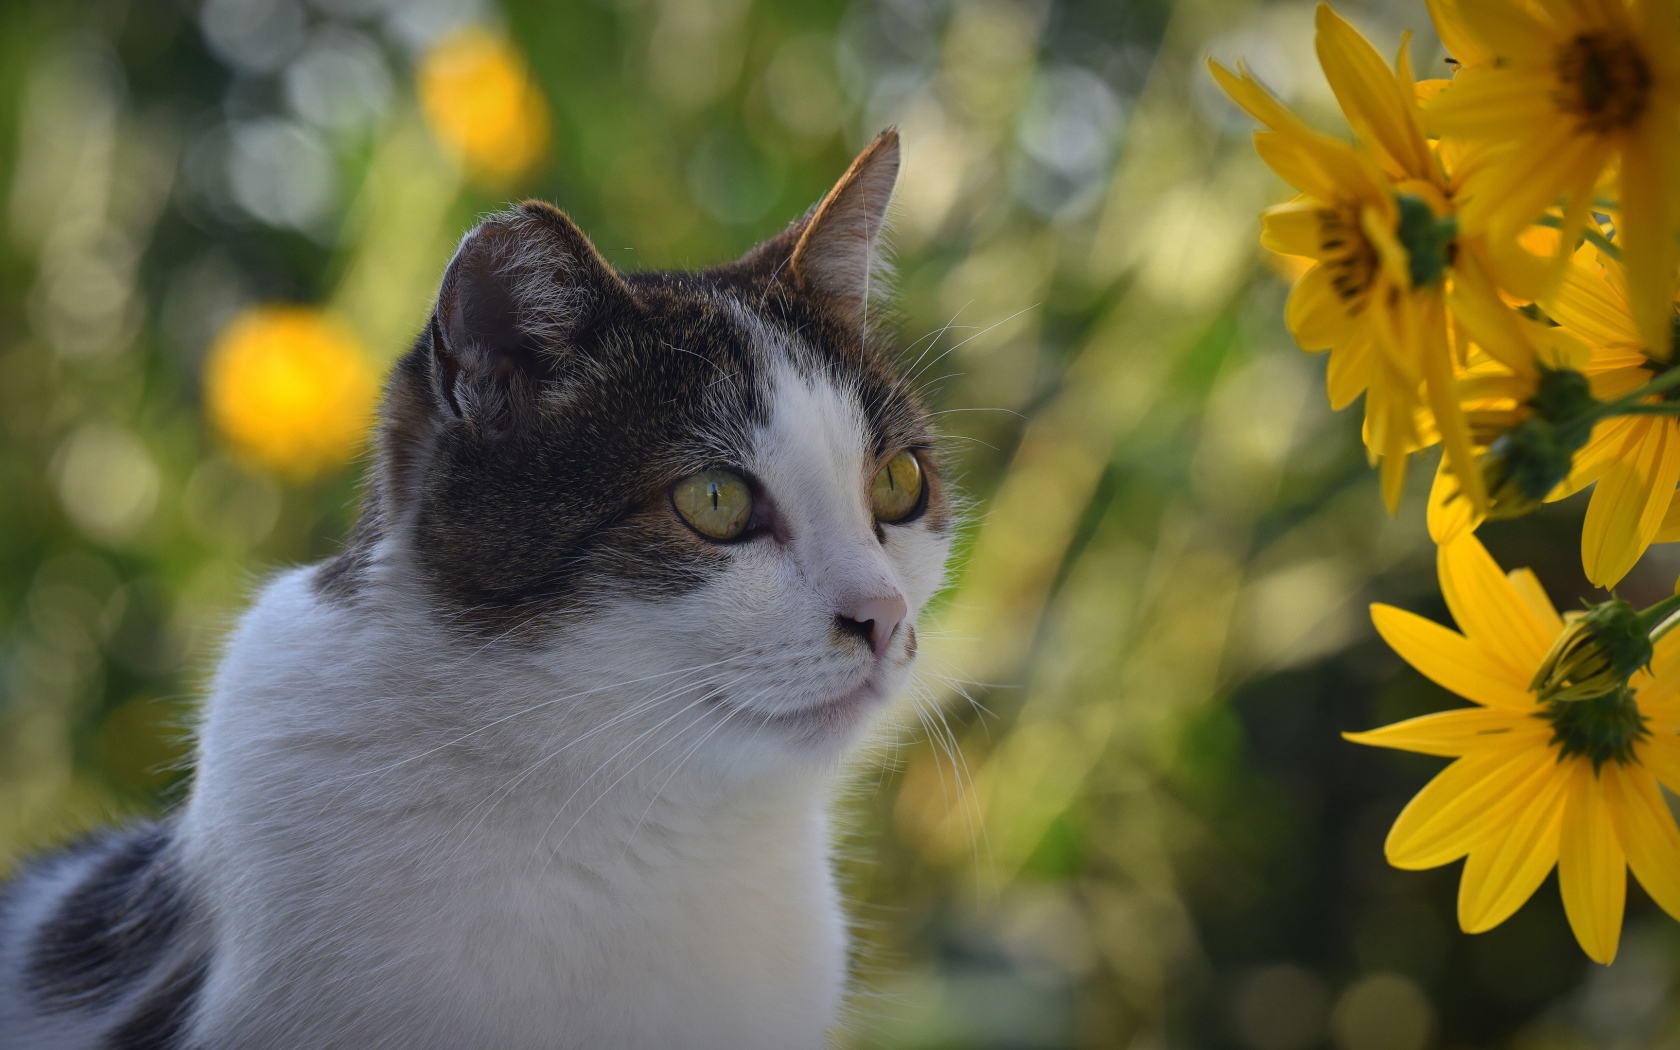 Cat sitting by yellow flowers